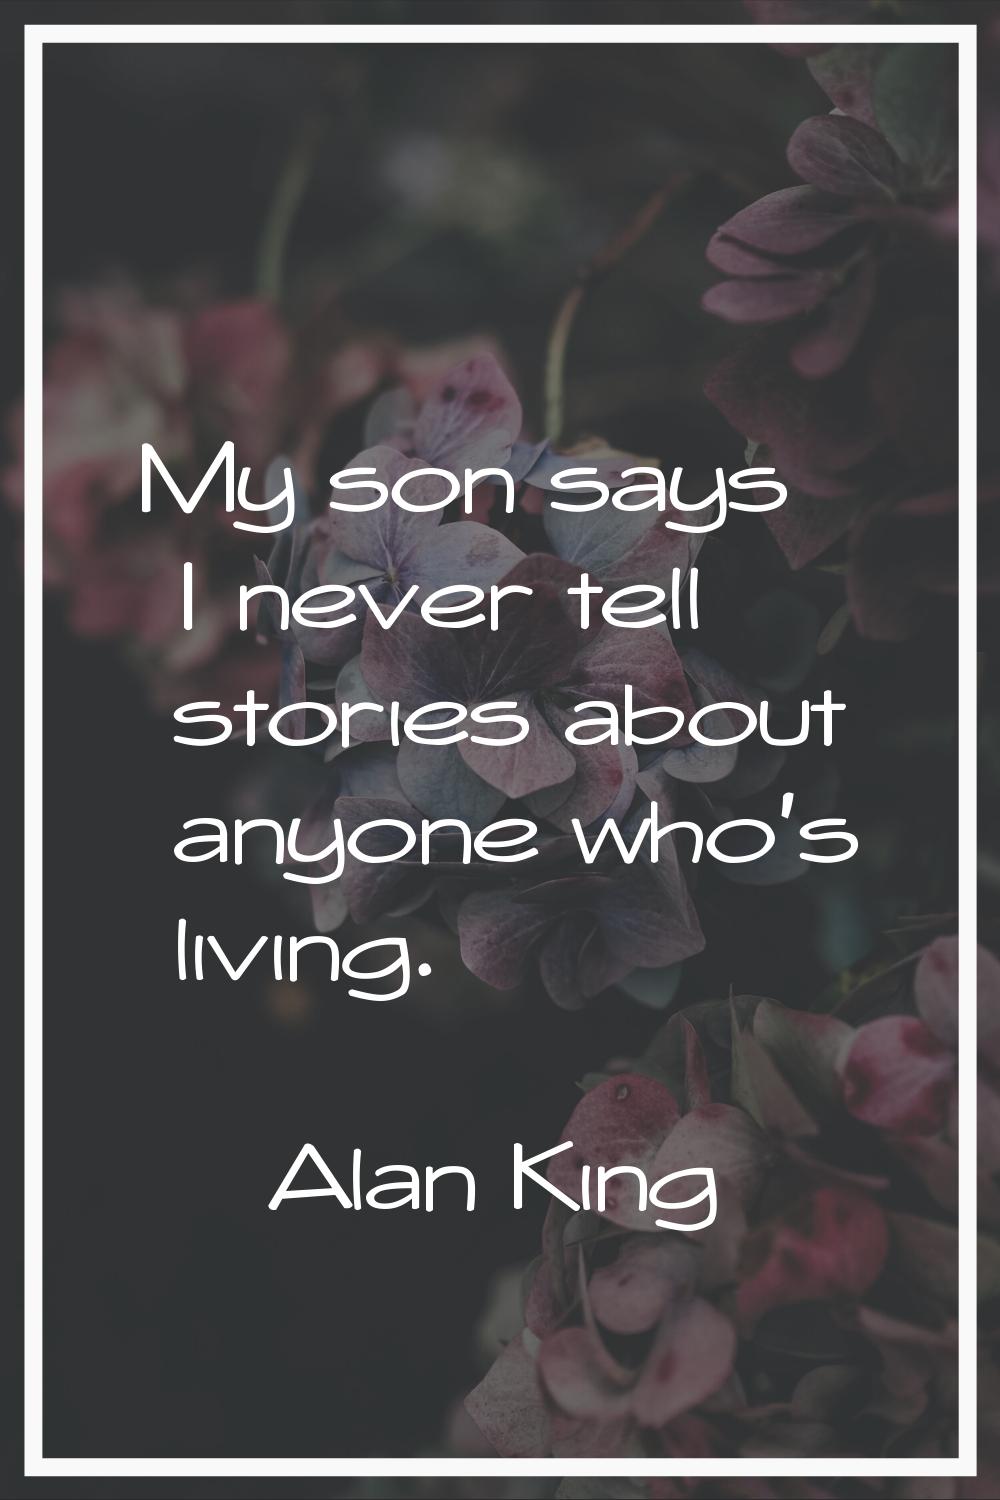 My son says I never tell stories about anyone who's living.